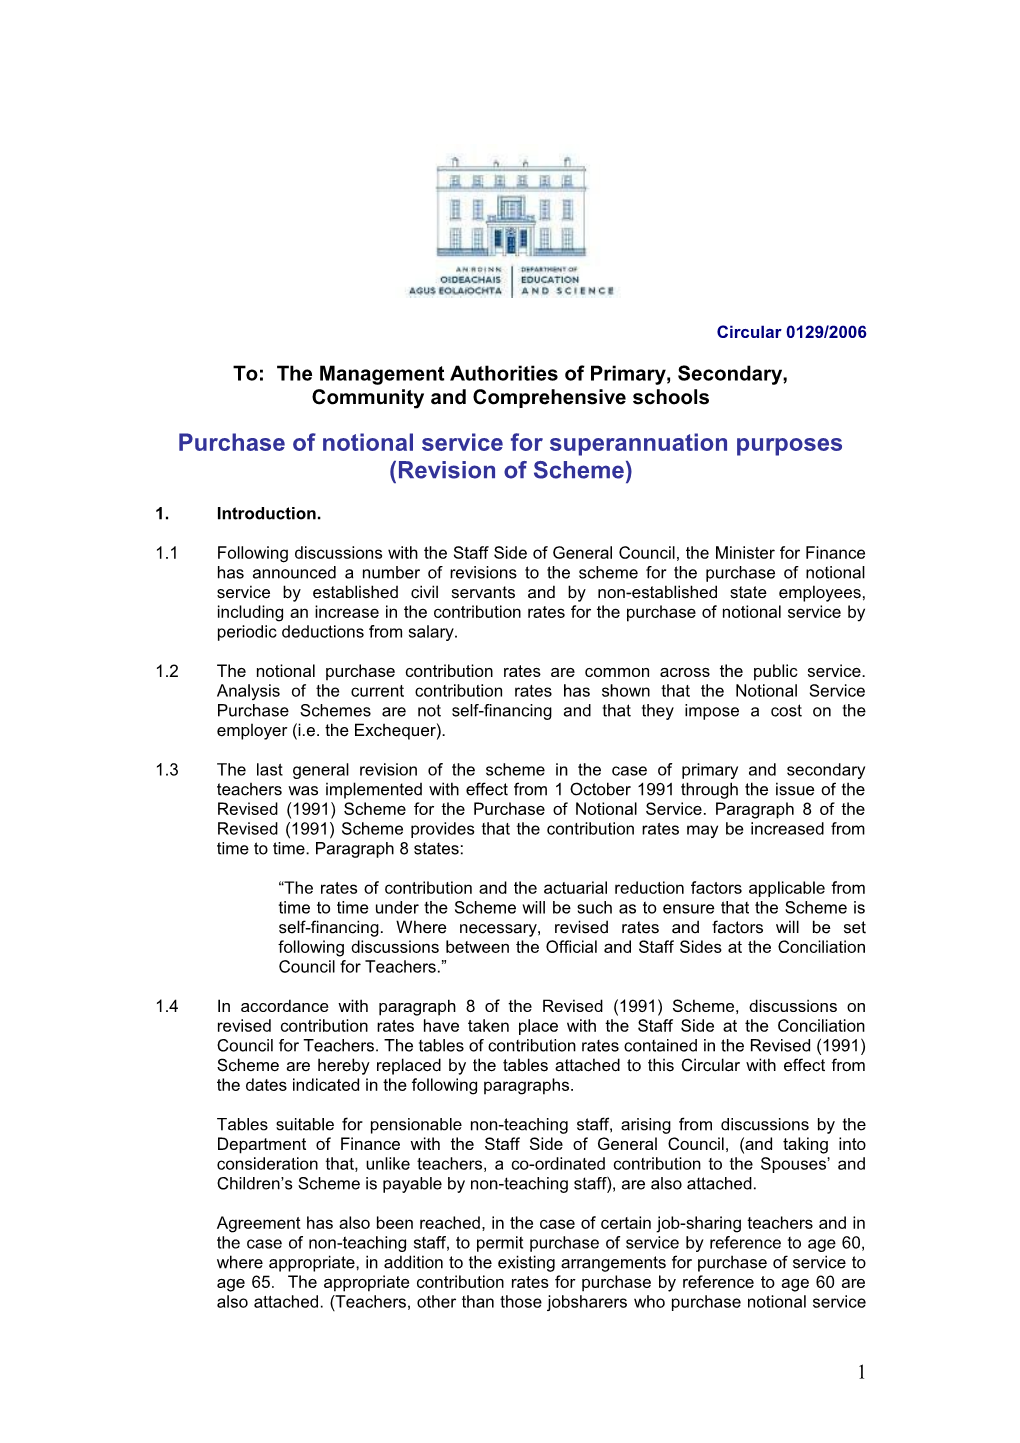 Circular 0129/2006: Purchase of Notional Service for Superannuation Purposes Revision Of